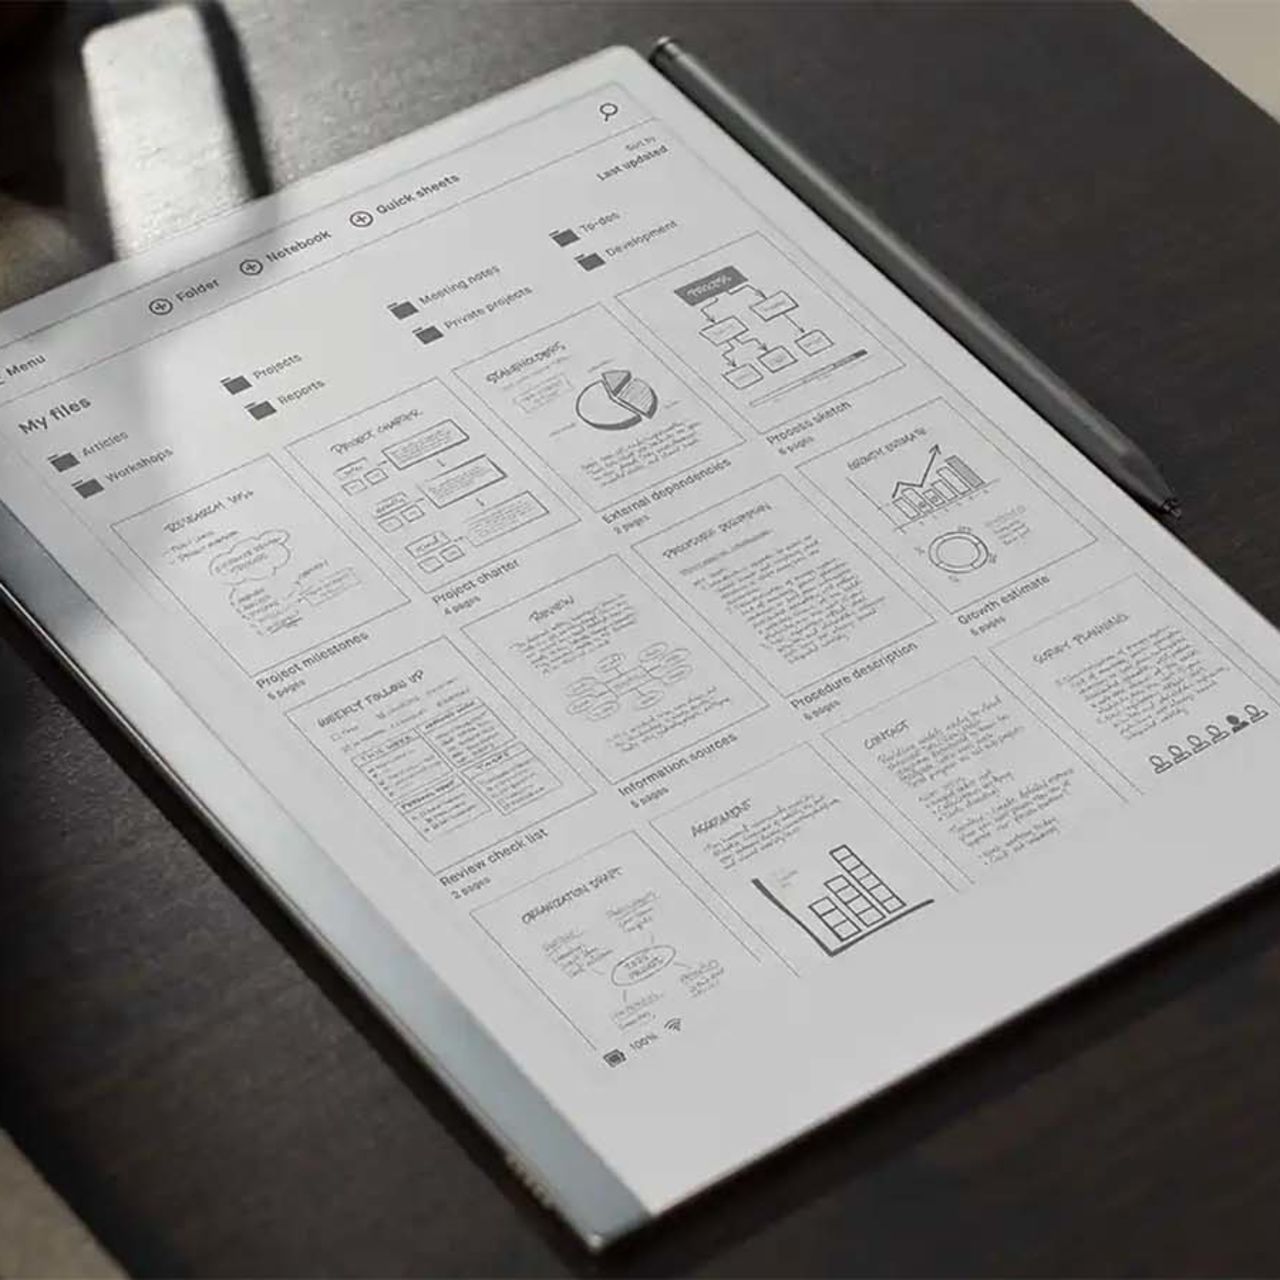 Remarkable Paper Tablet 2, Announced!